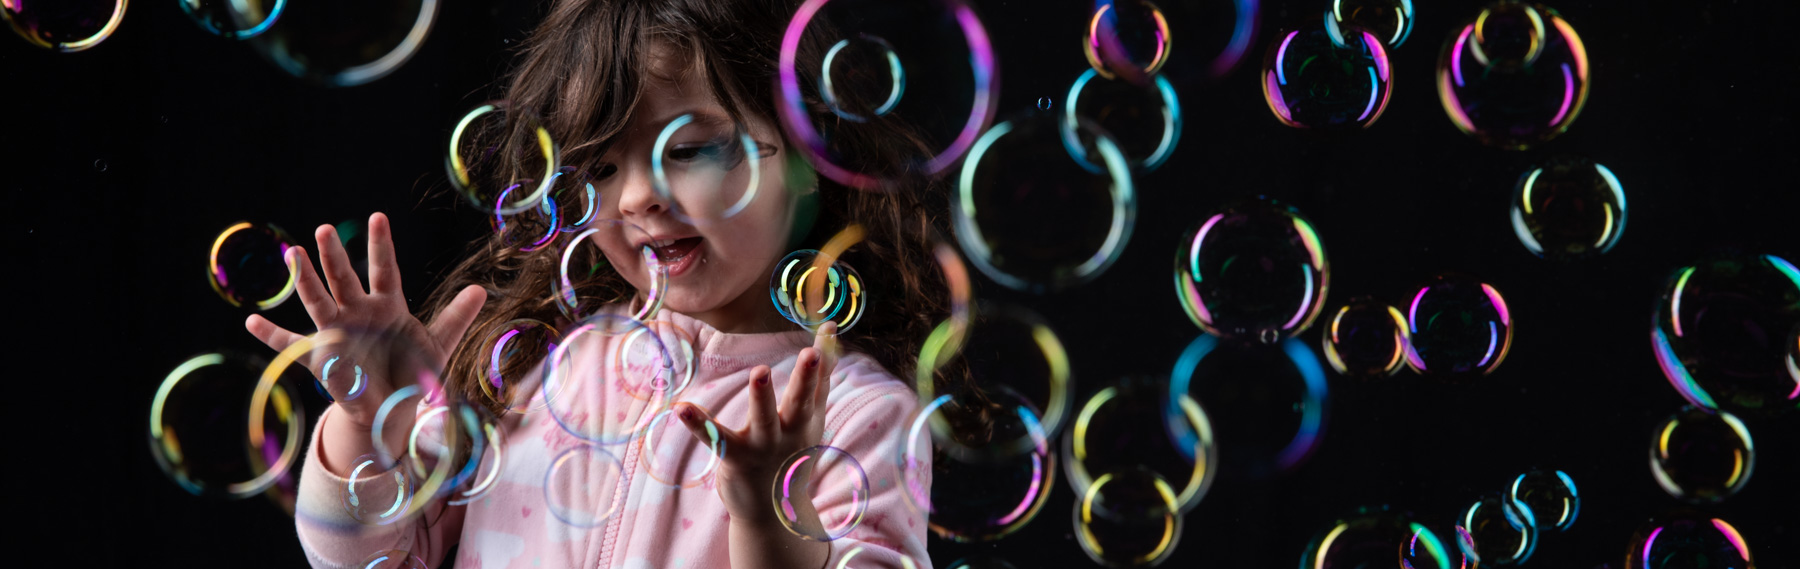 girl in studio surrounded by bubbles